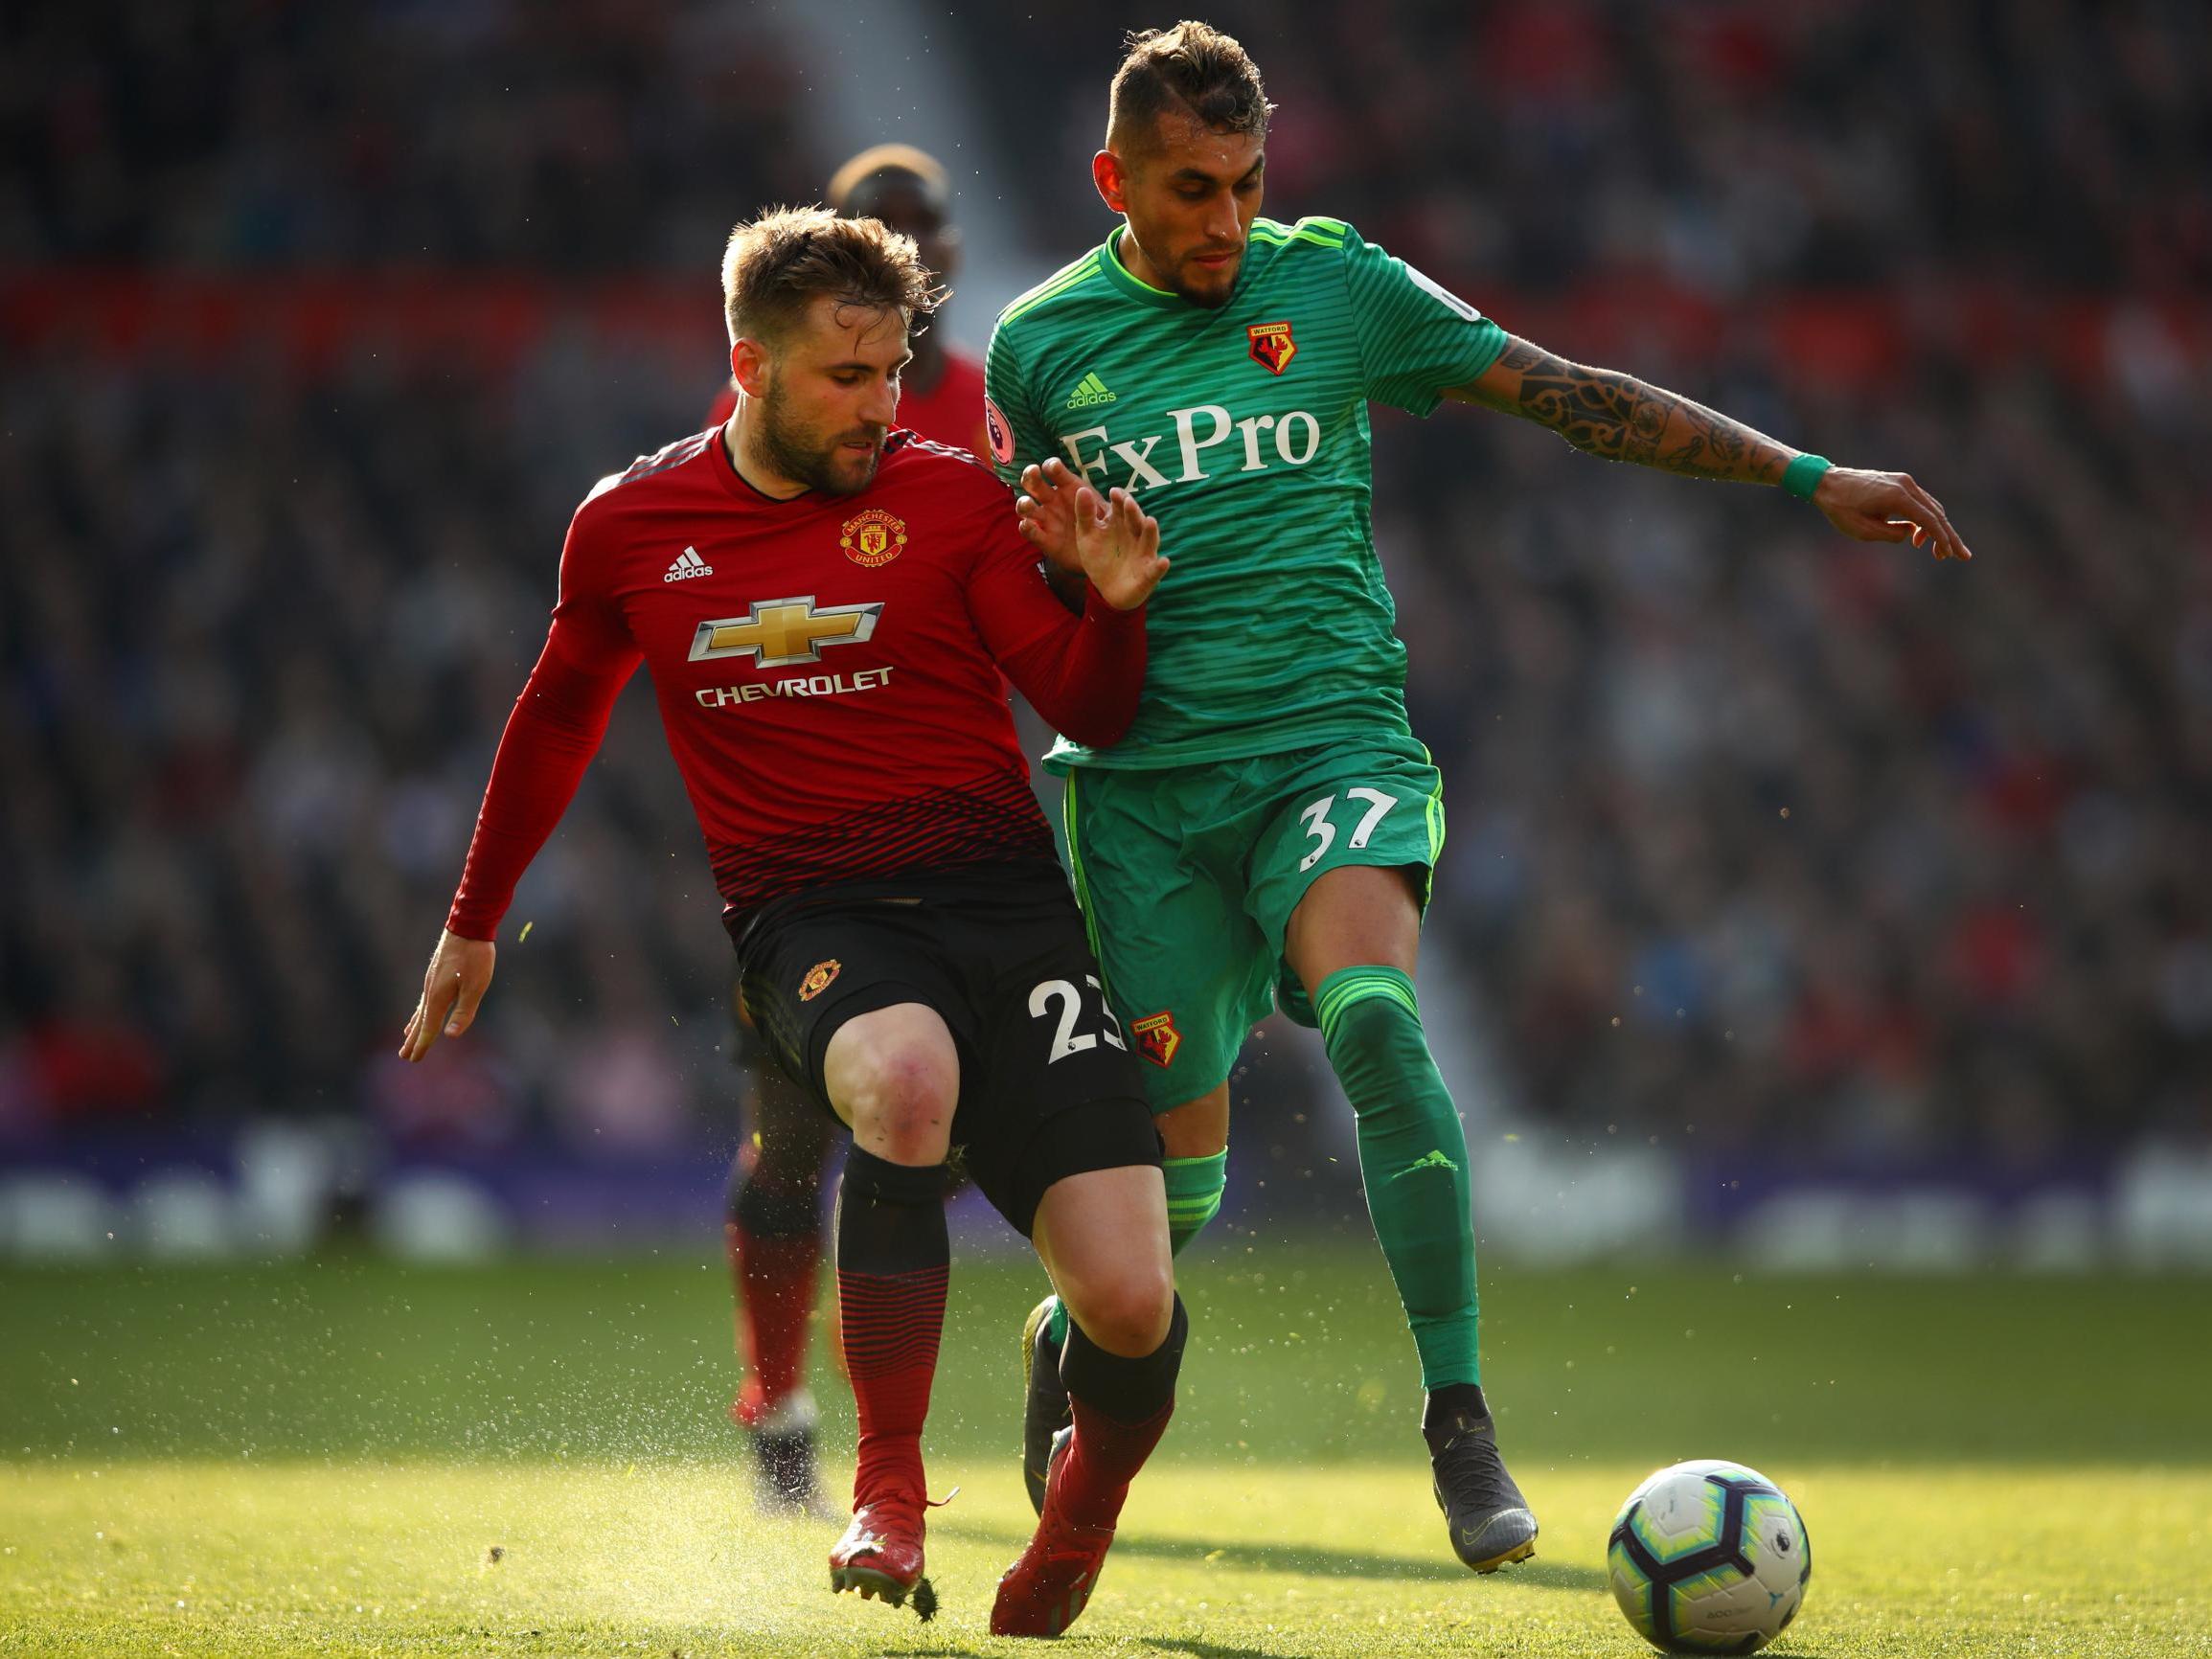 Luke Shaw in action for United